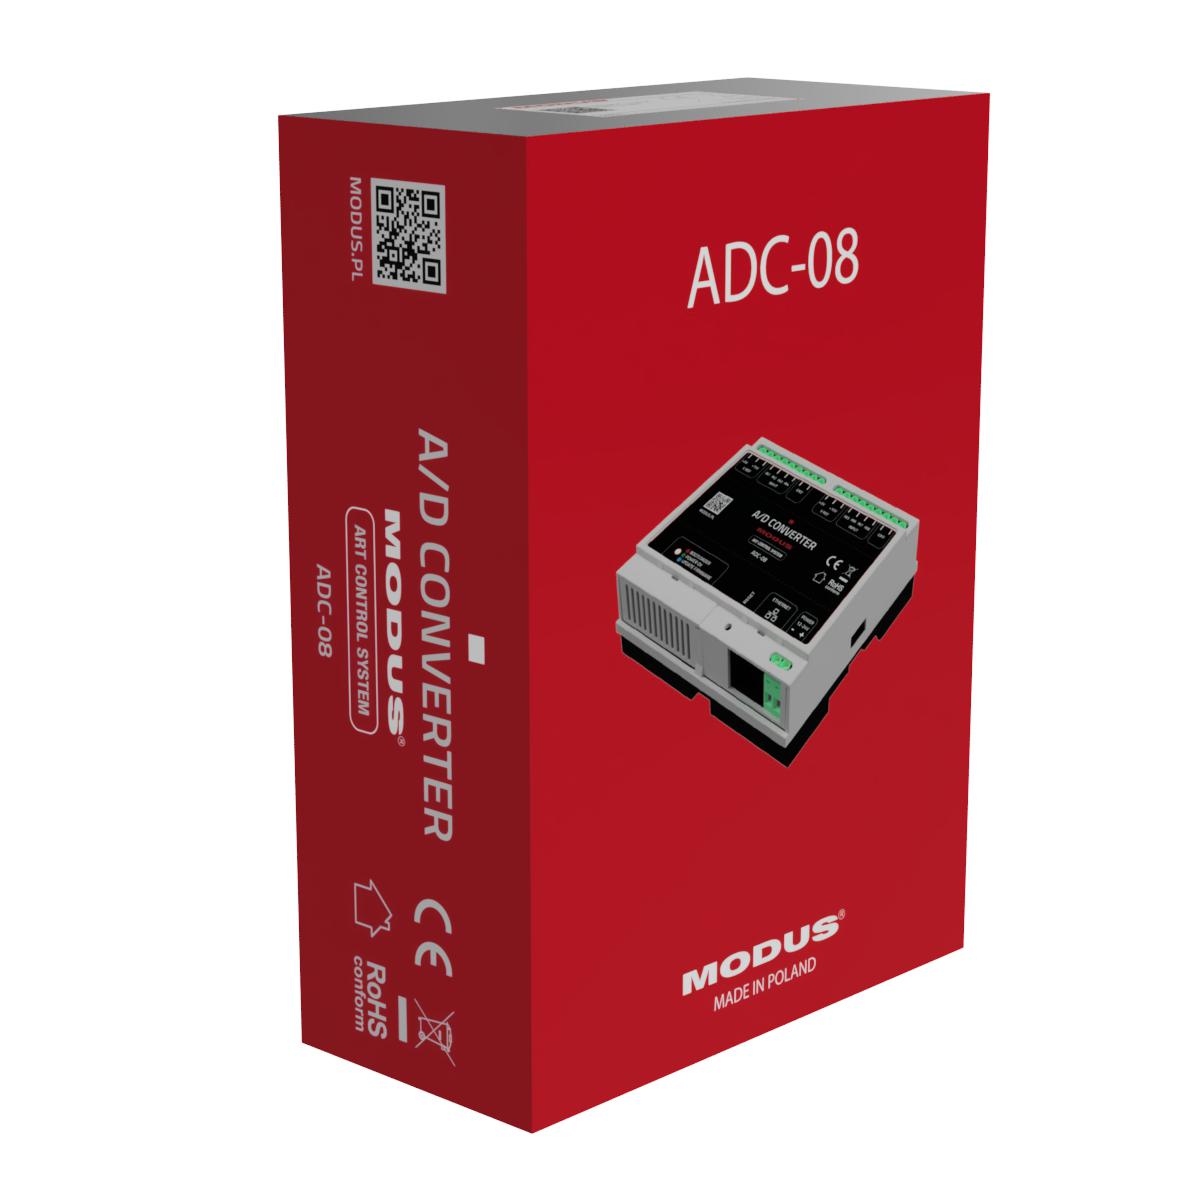 New control modules on offer from Modus.